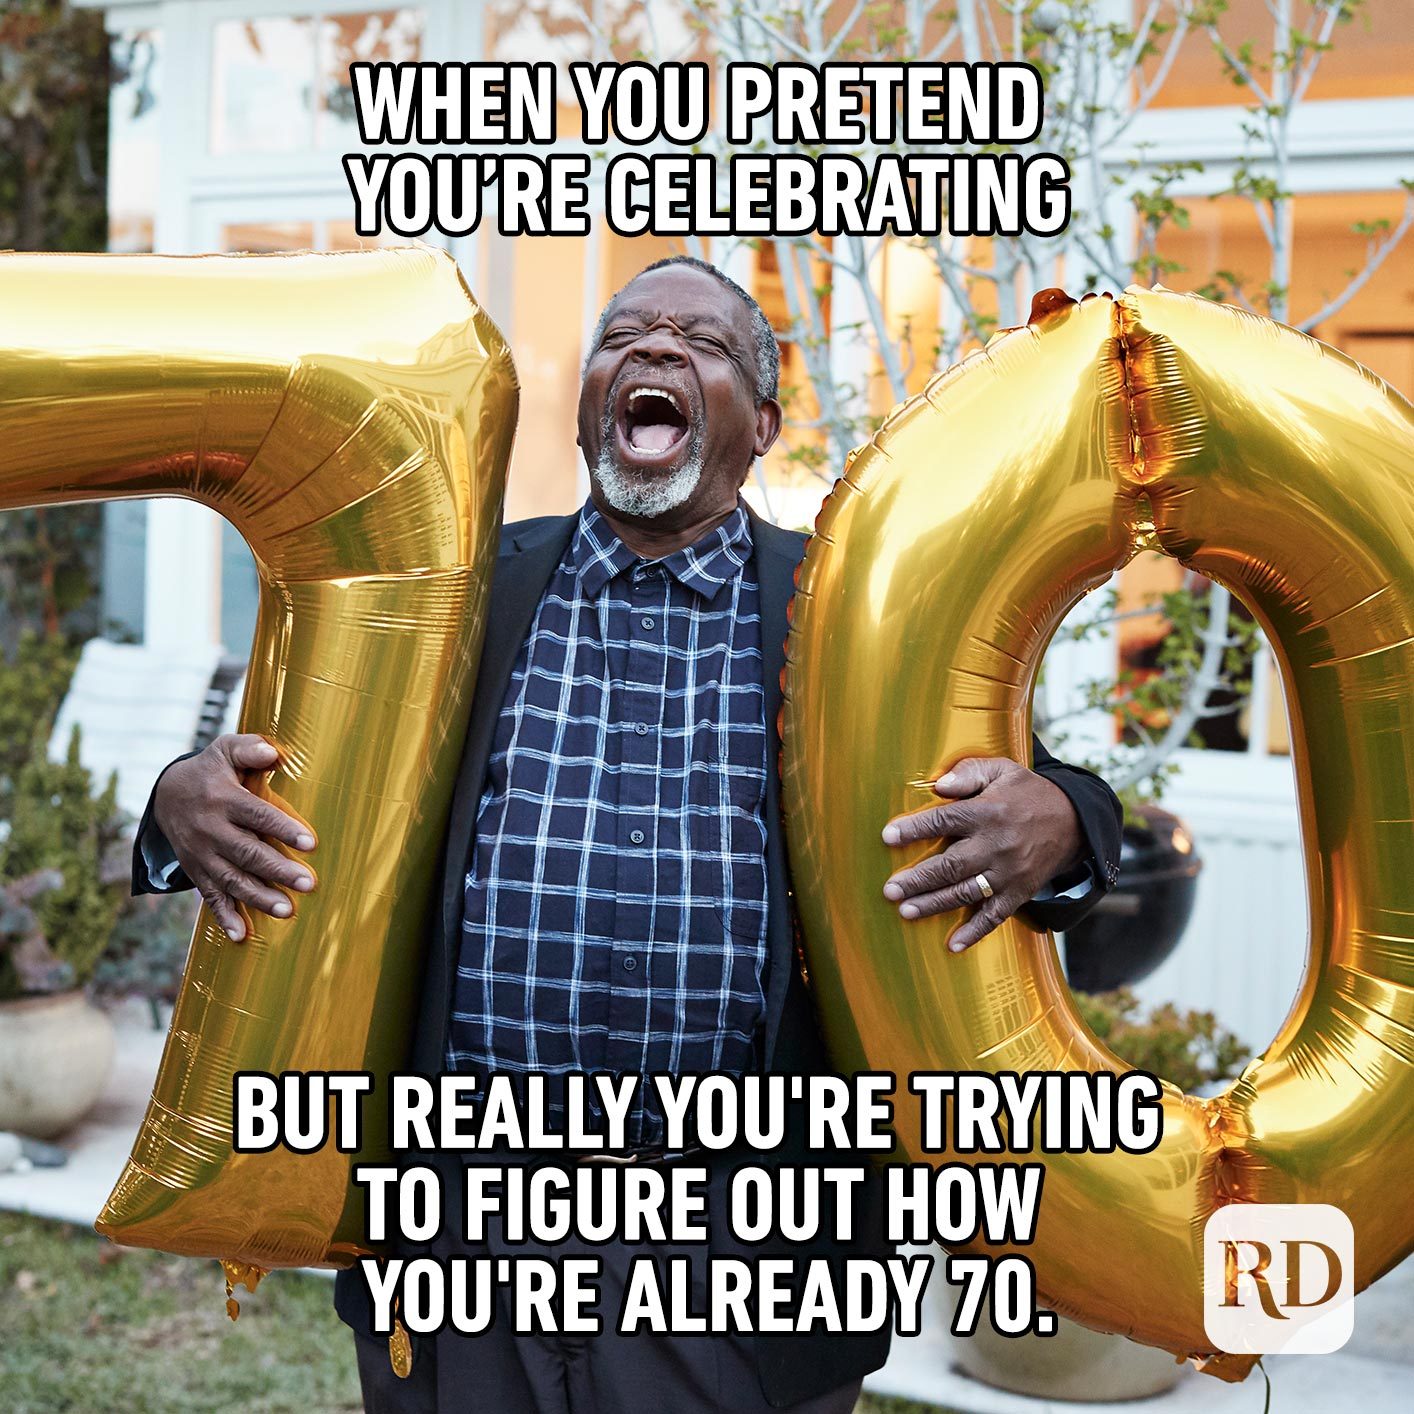 When you pretend you're celebrating, but really you're trying to figure out how you're already 70.